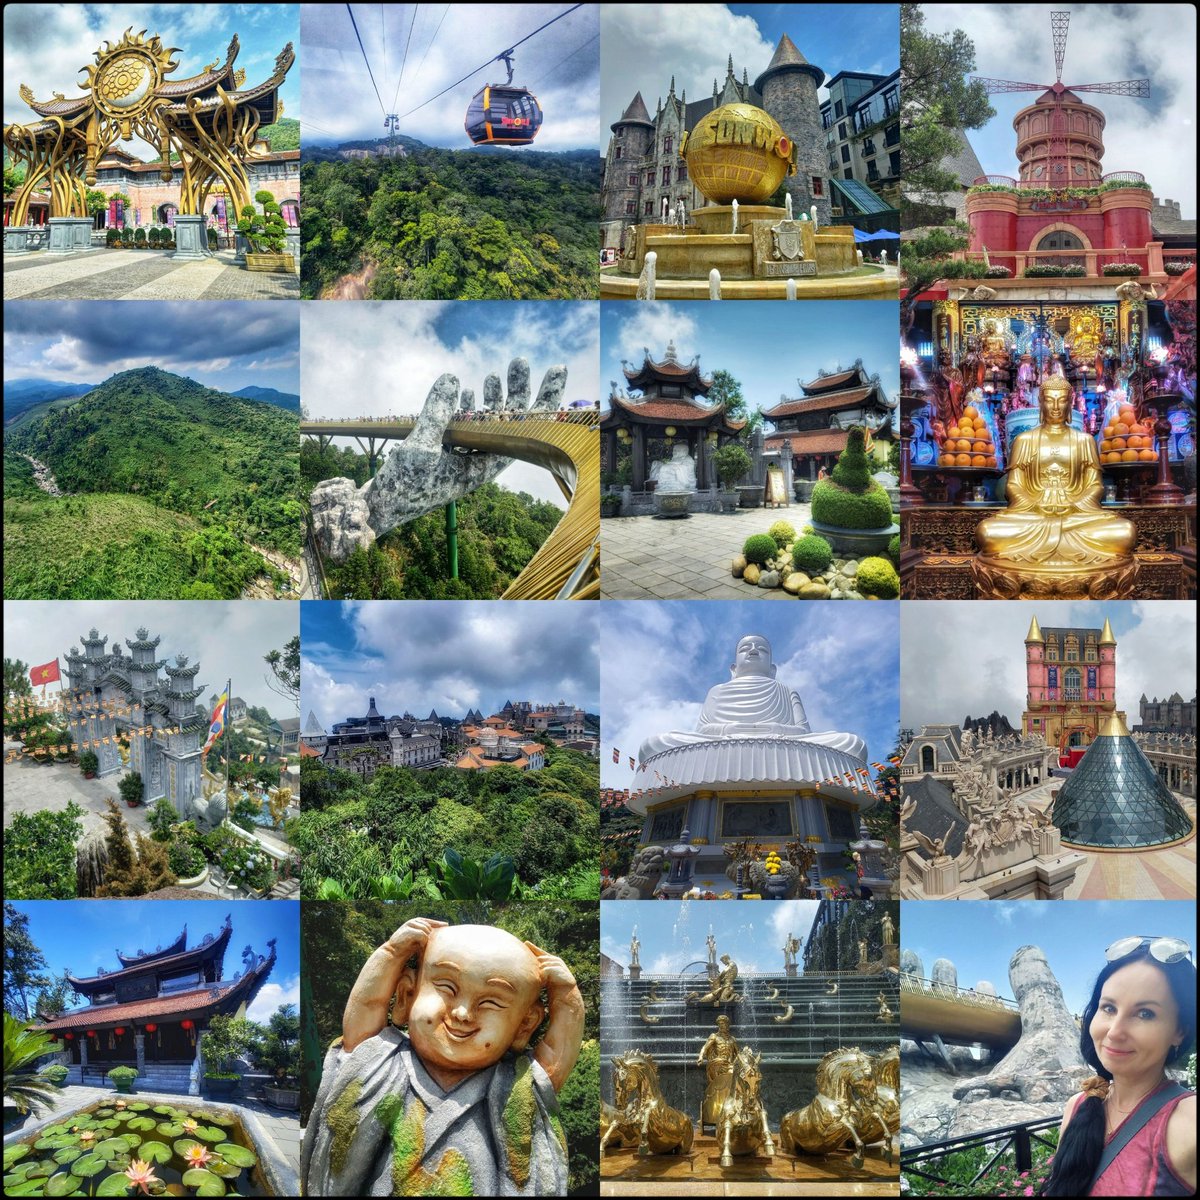 #goodmorning & enjoy your day 😊 #VietnamAdventure - 10 - #BaNaHills It was just a entertainment day out 🤩 Definitely Ba Na Hills near #Danang is fun for kids of all ages 😁 #SongOfTheDay is youtu.be/0R8IbpKXavM?si… #Travel #AsiaTrip #enjoylife